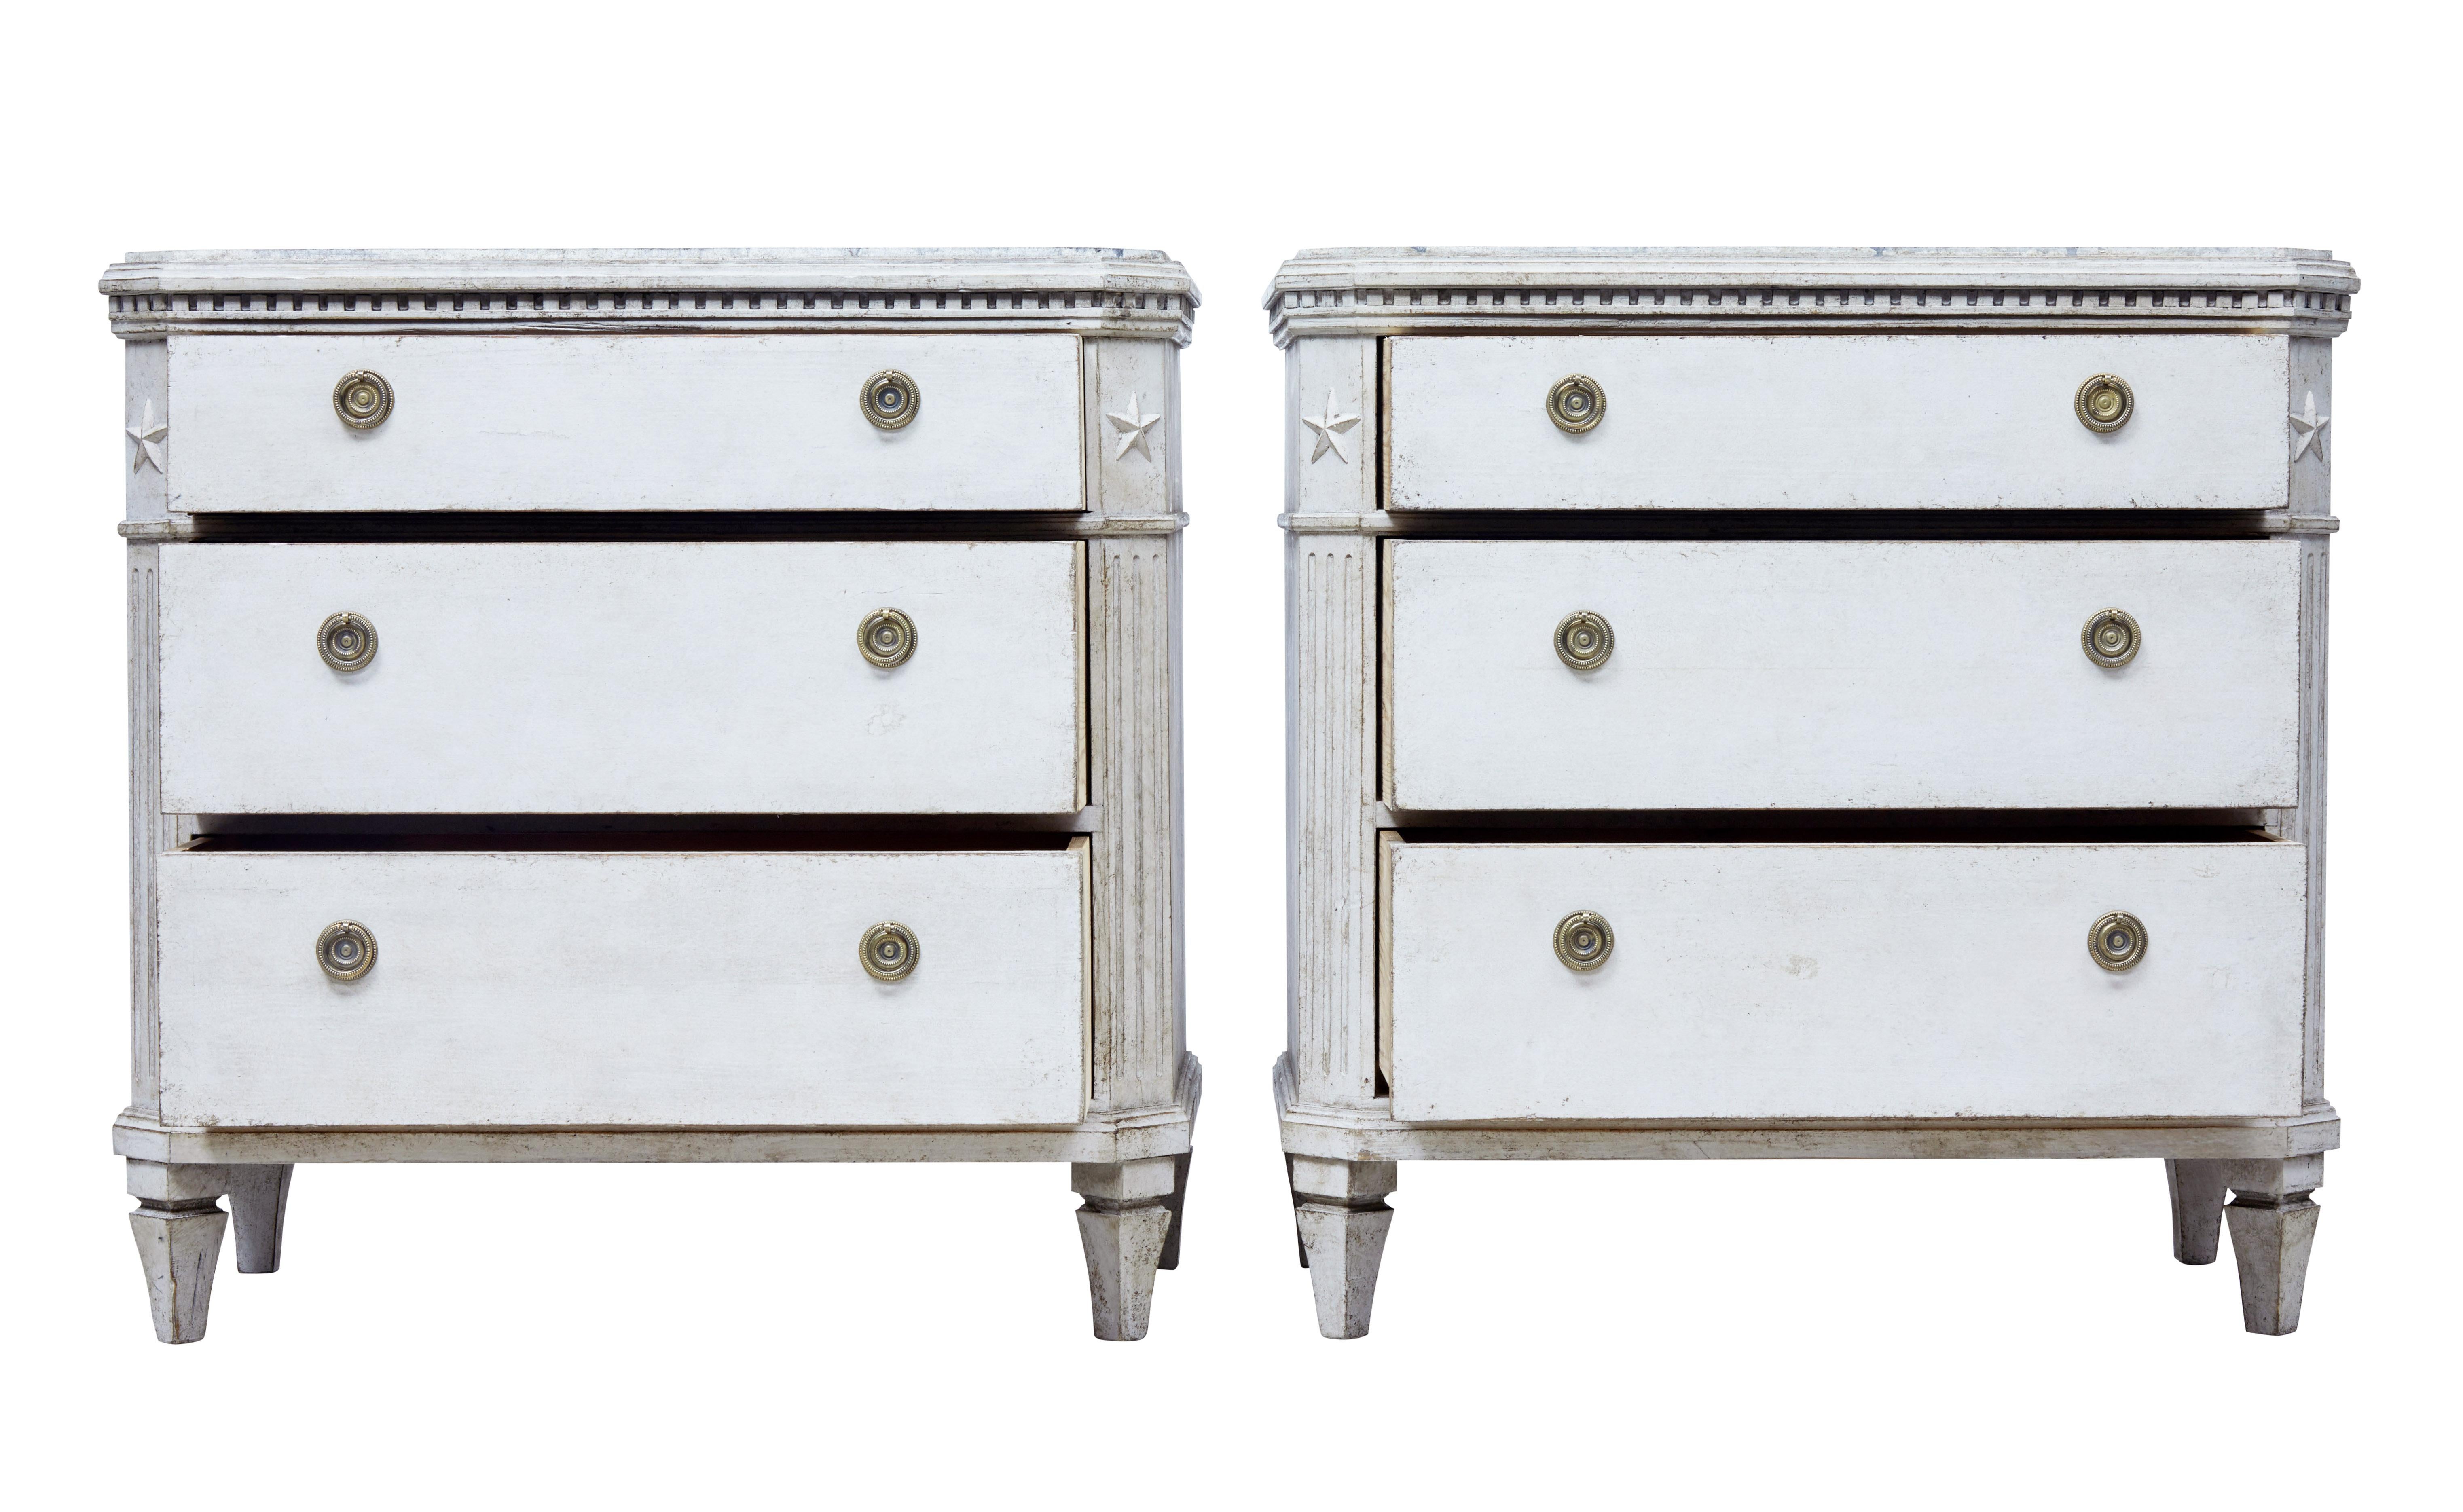 Pair of painted Swedish commodes, circa 1870.

Top surface has been decorated with a hand painted faux marble effect. Dentil frieze below the top surface which leads down to the 3 drawers with working locks and key. Canted corners with applied